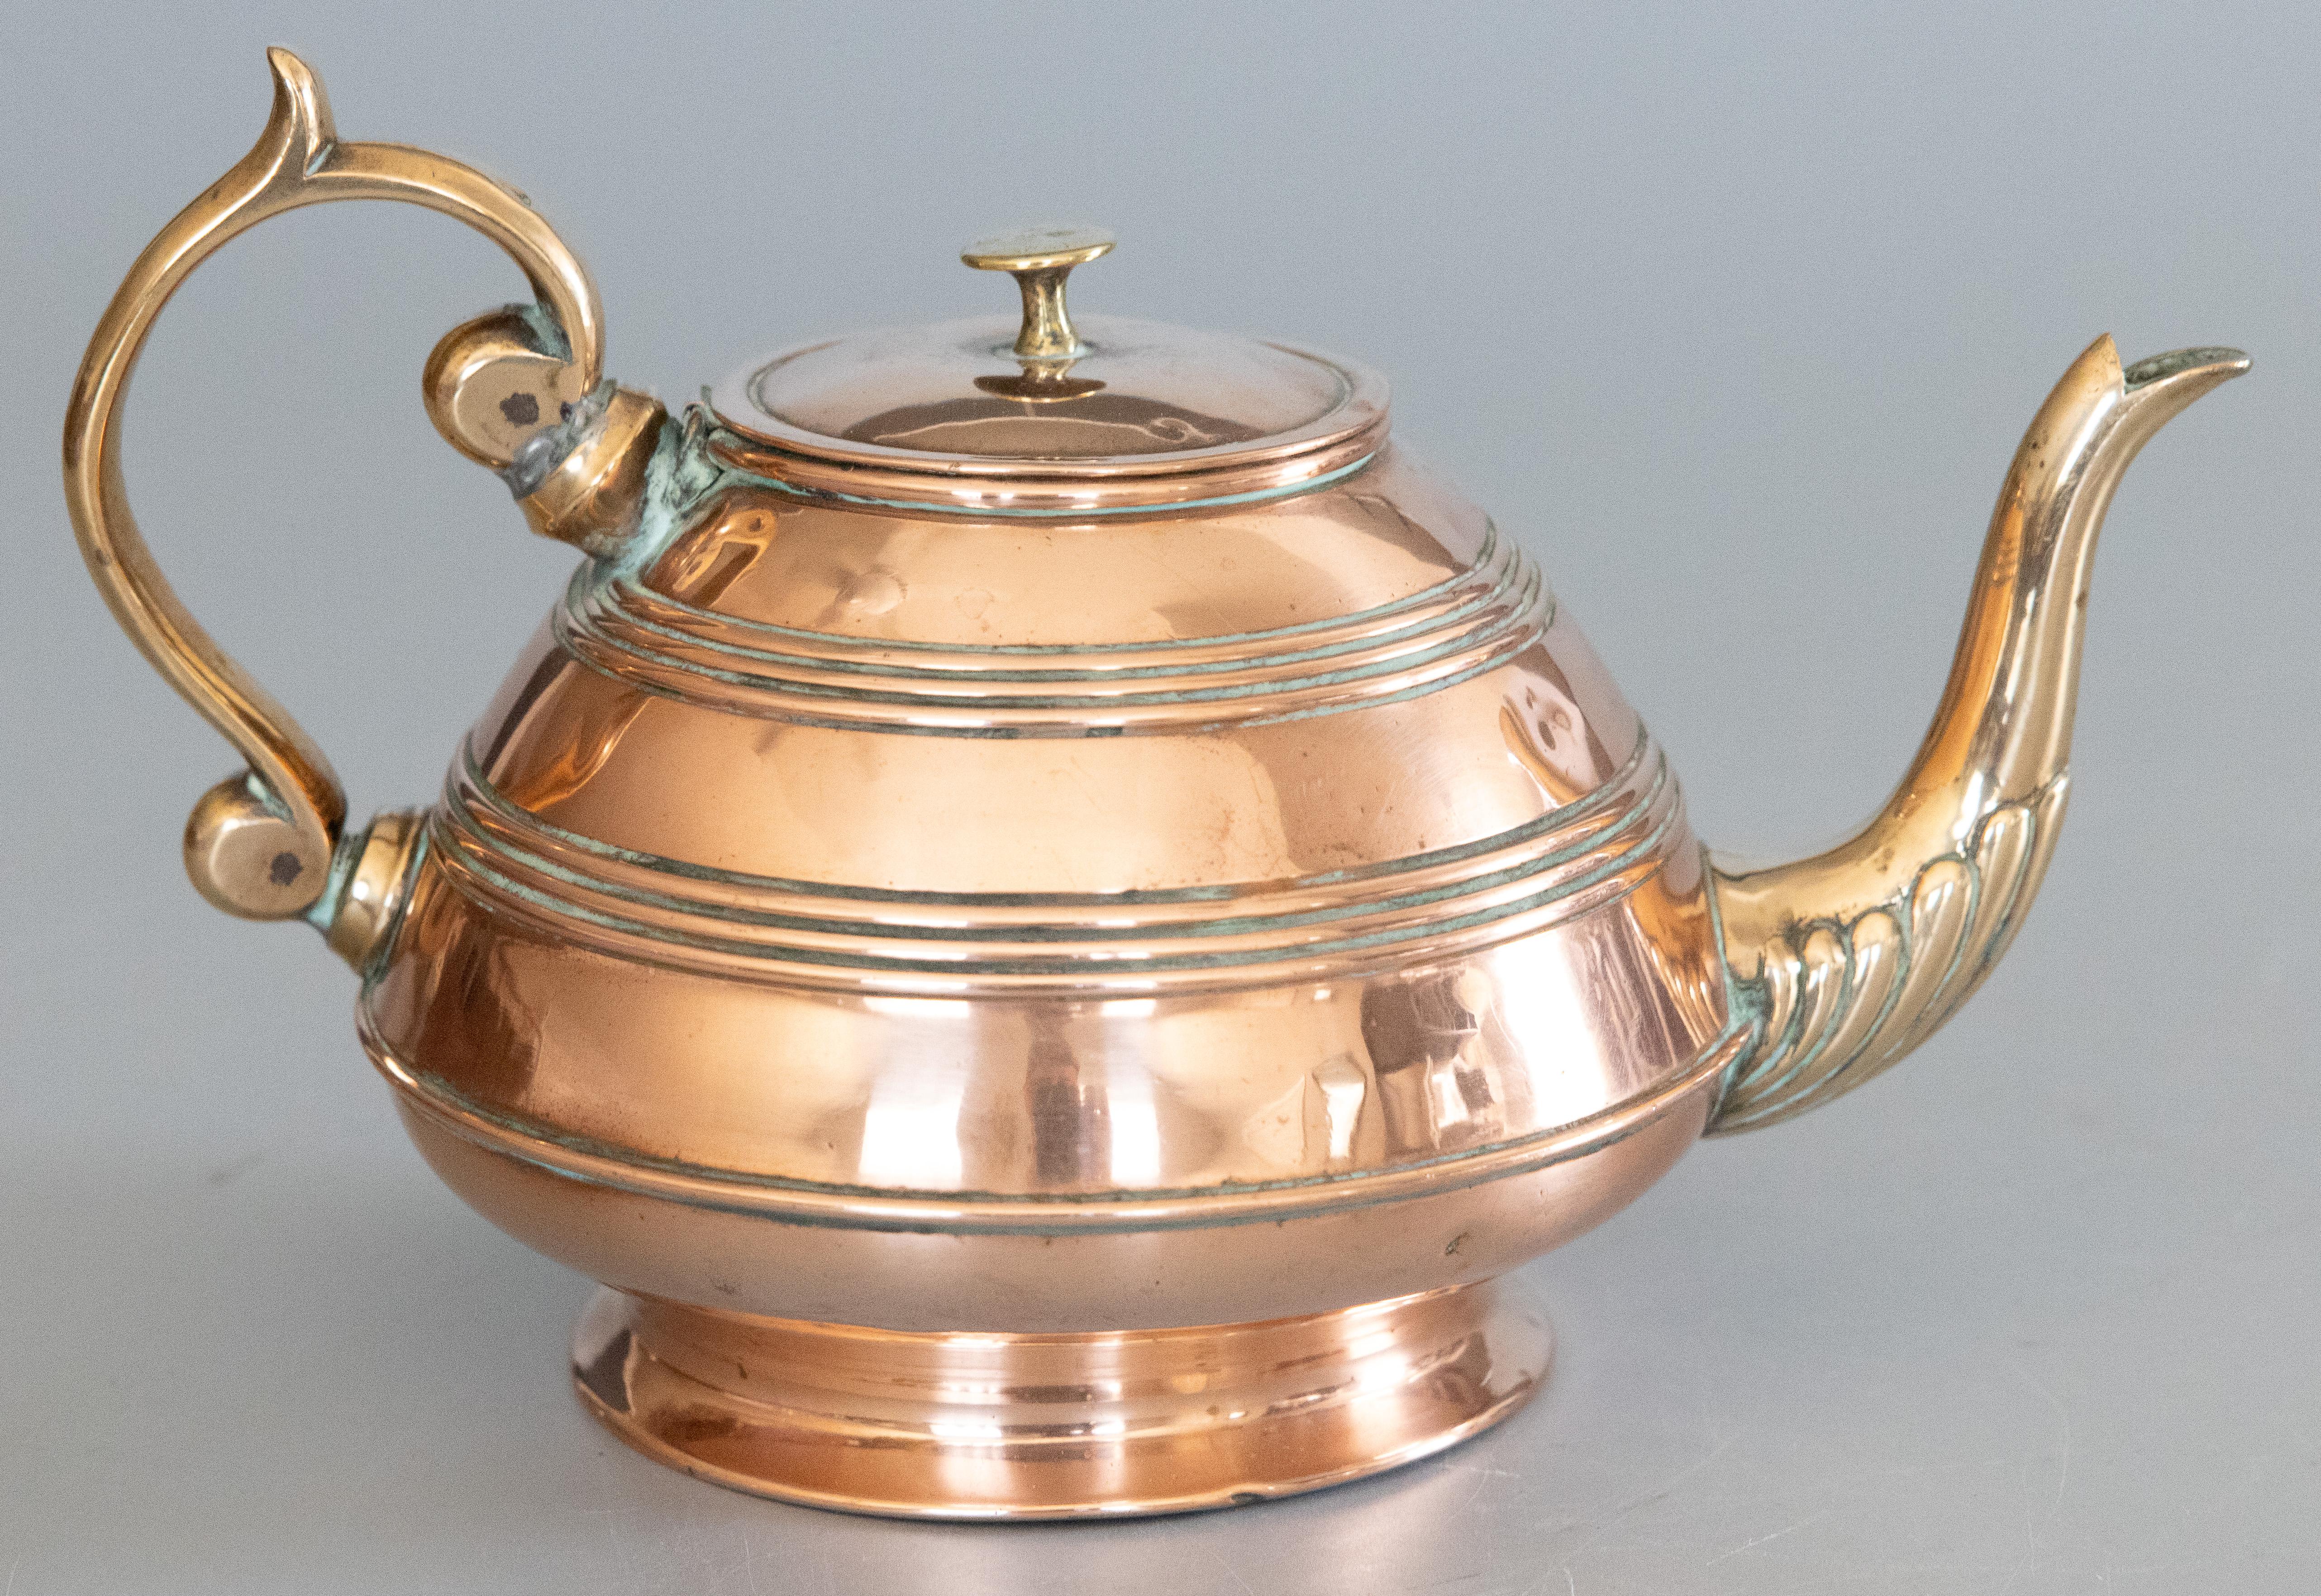 A lovely antique Art Nouveau style English copper and brass tea kettle or teapot by Soutter & Sons, circa 1890. This fine tea pot has a handmade copper body with brass handle and spout in a lovely patina. It would a charming addition to your kitchen